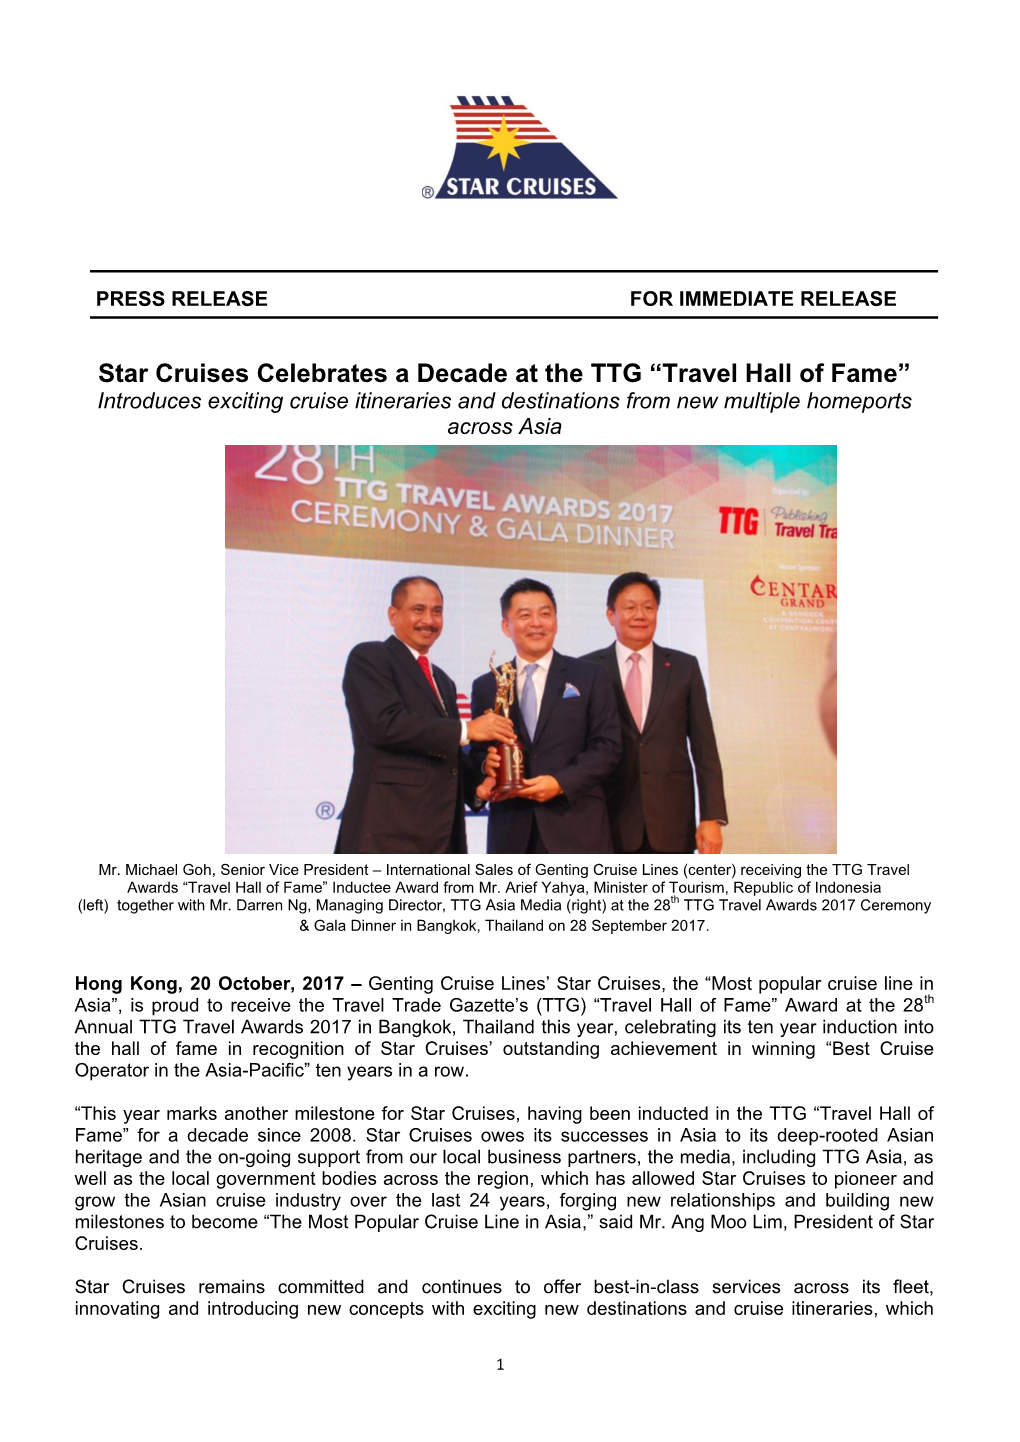 Star Cruises Celebrates a Decade at the Ttg "Travel Hall of Fame"